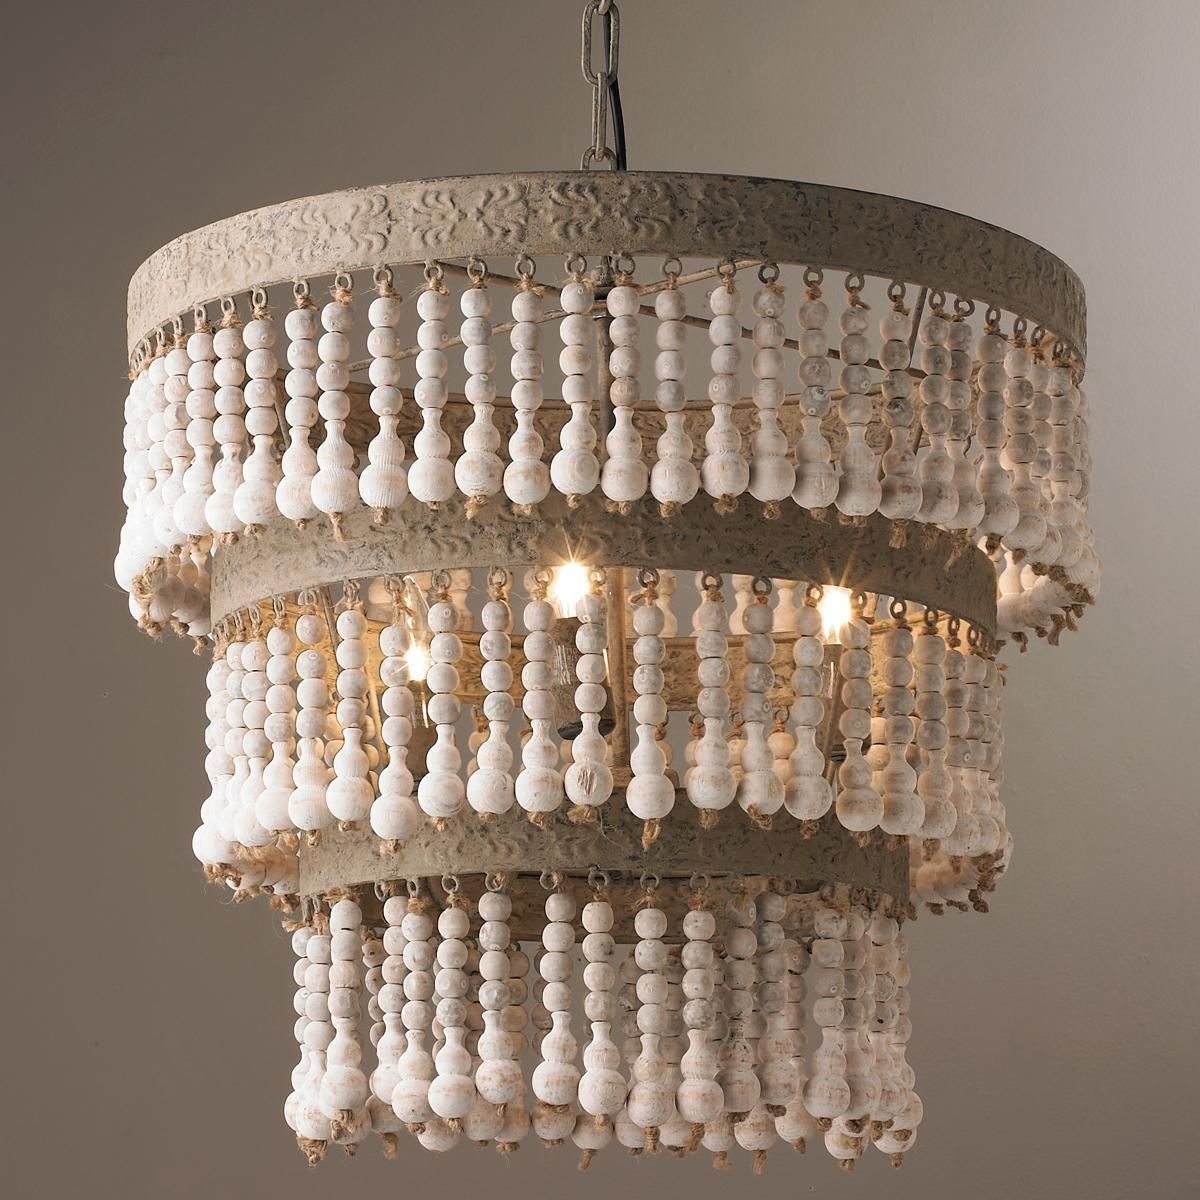 Three Tiered Wood Beaded Chandelier Wood Bead Chandelier Intended For Turquoise Chandelier Lamp Shades (View 6 of 25)